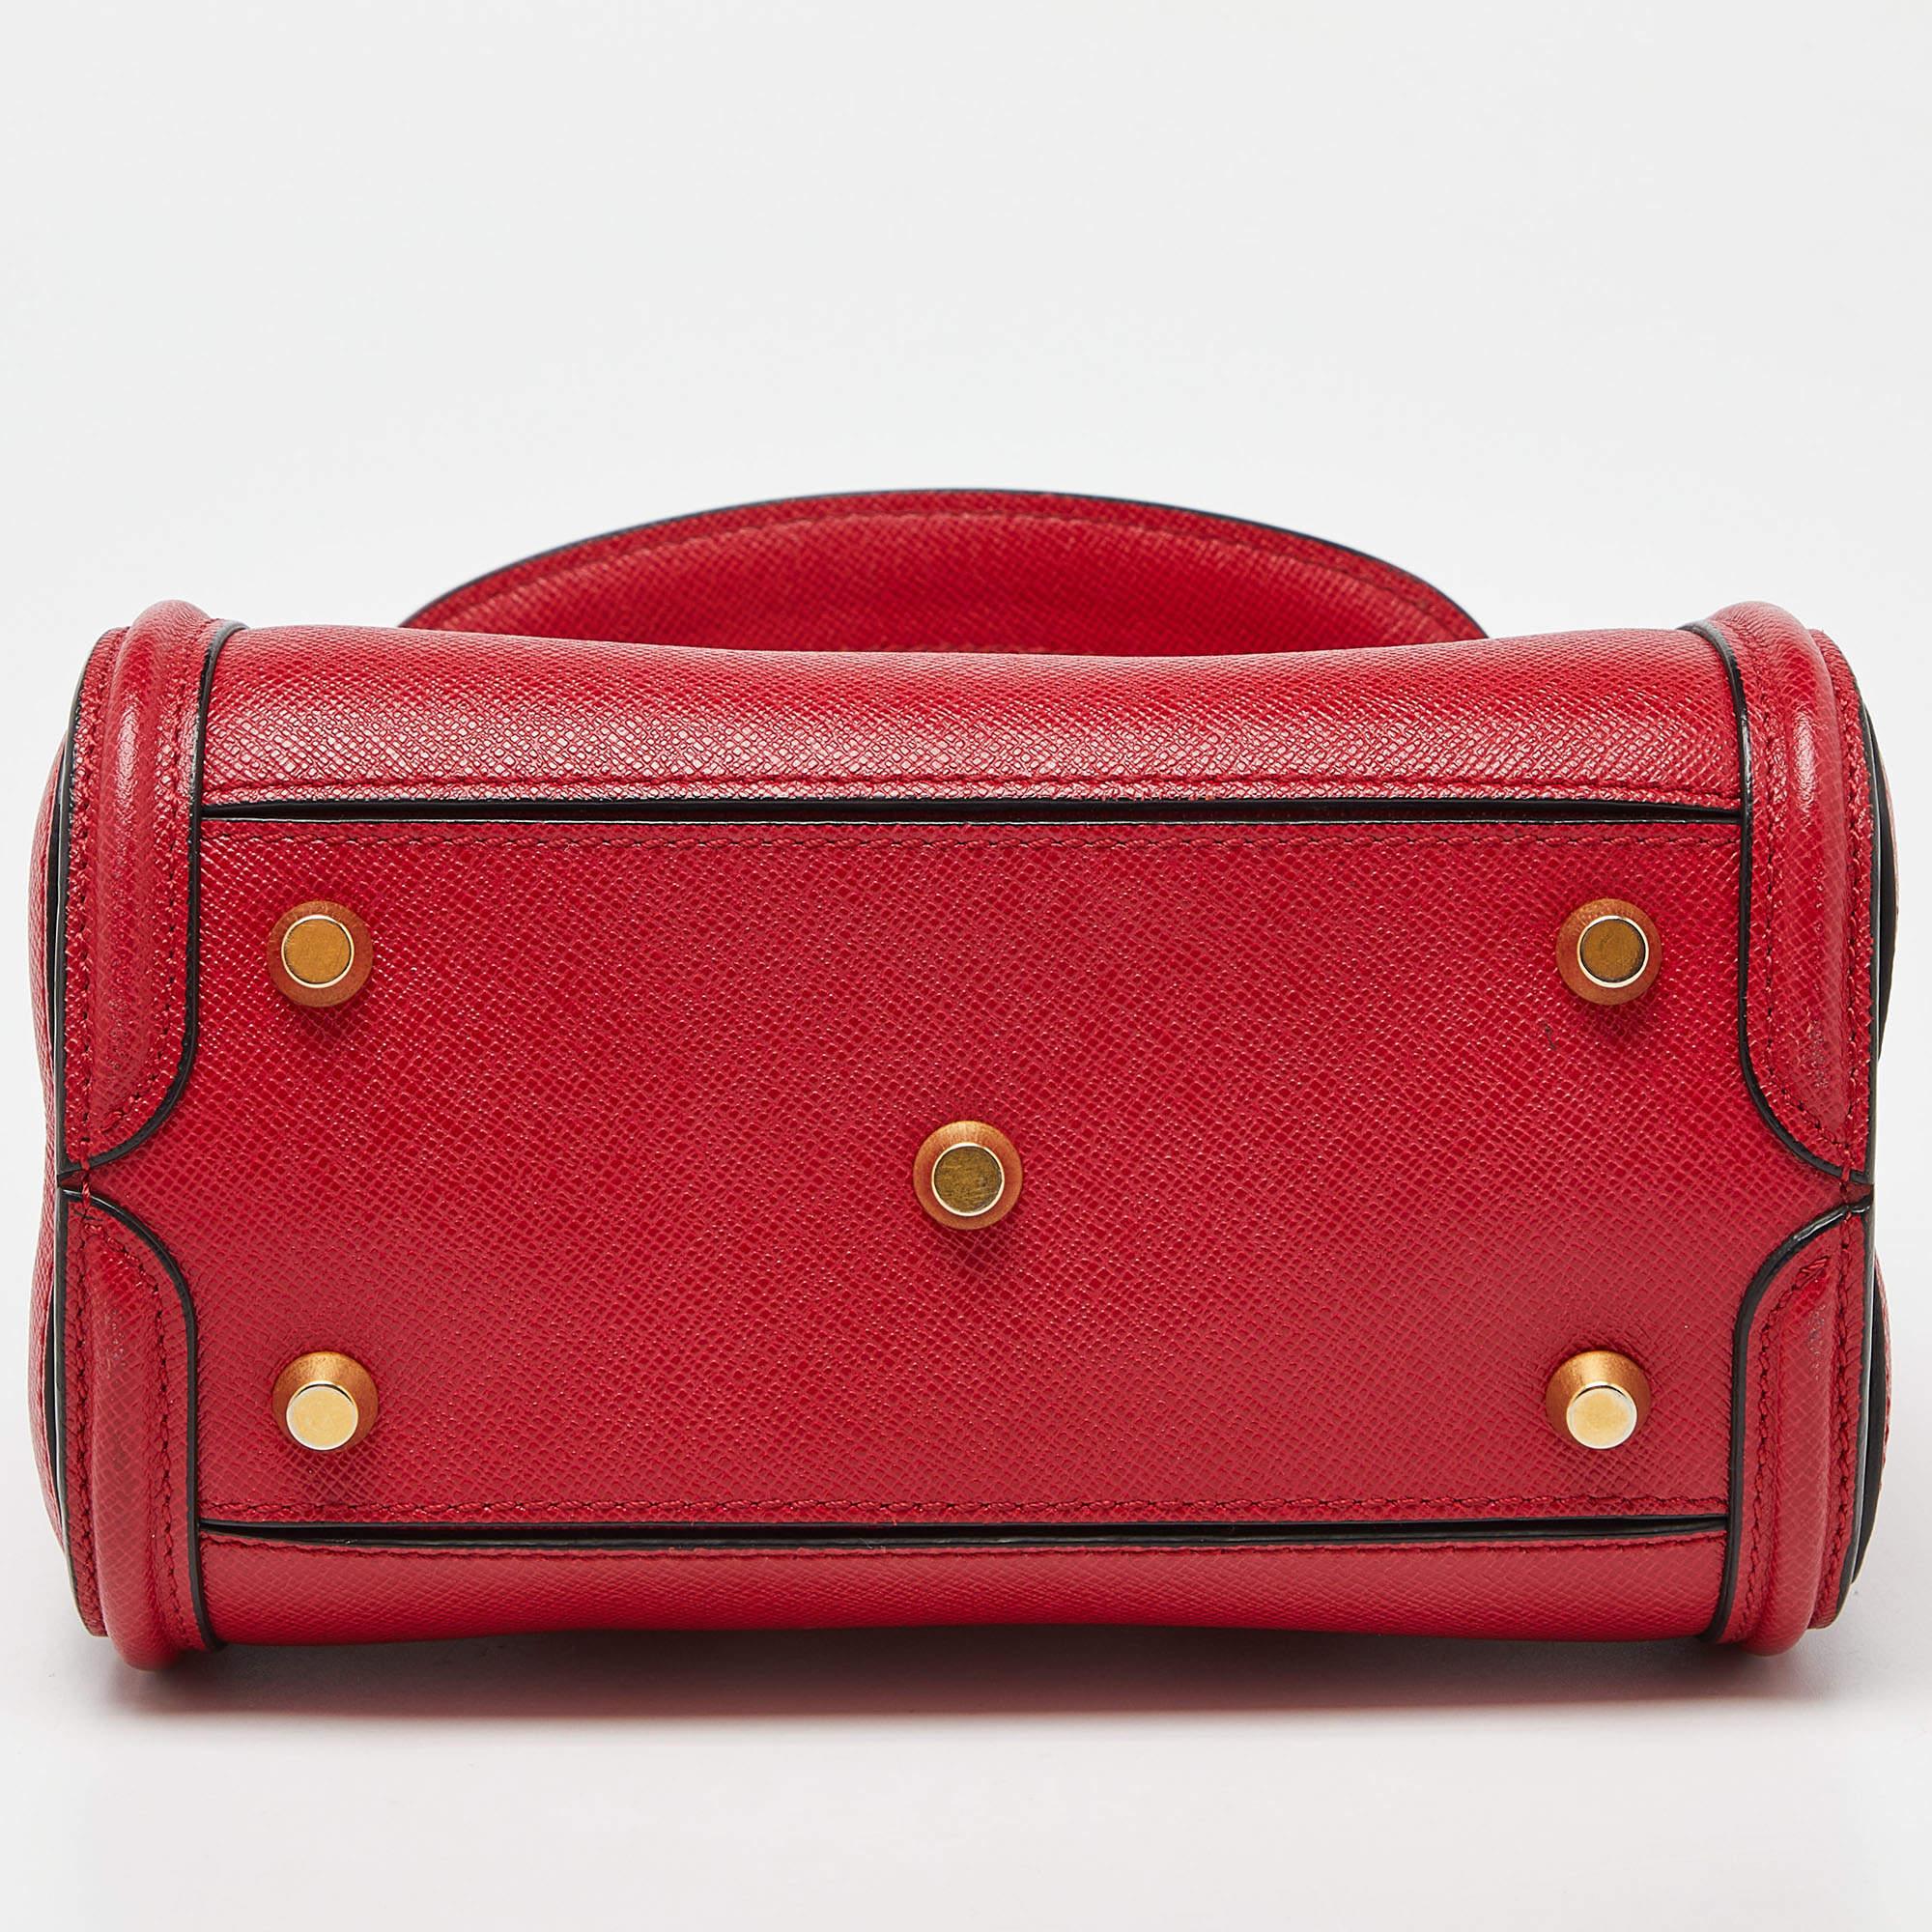 Alexander McQueen Red Leather Mini Heroine Bag For Sale 1